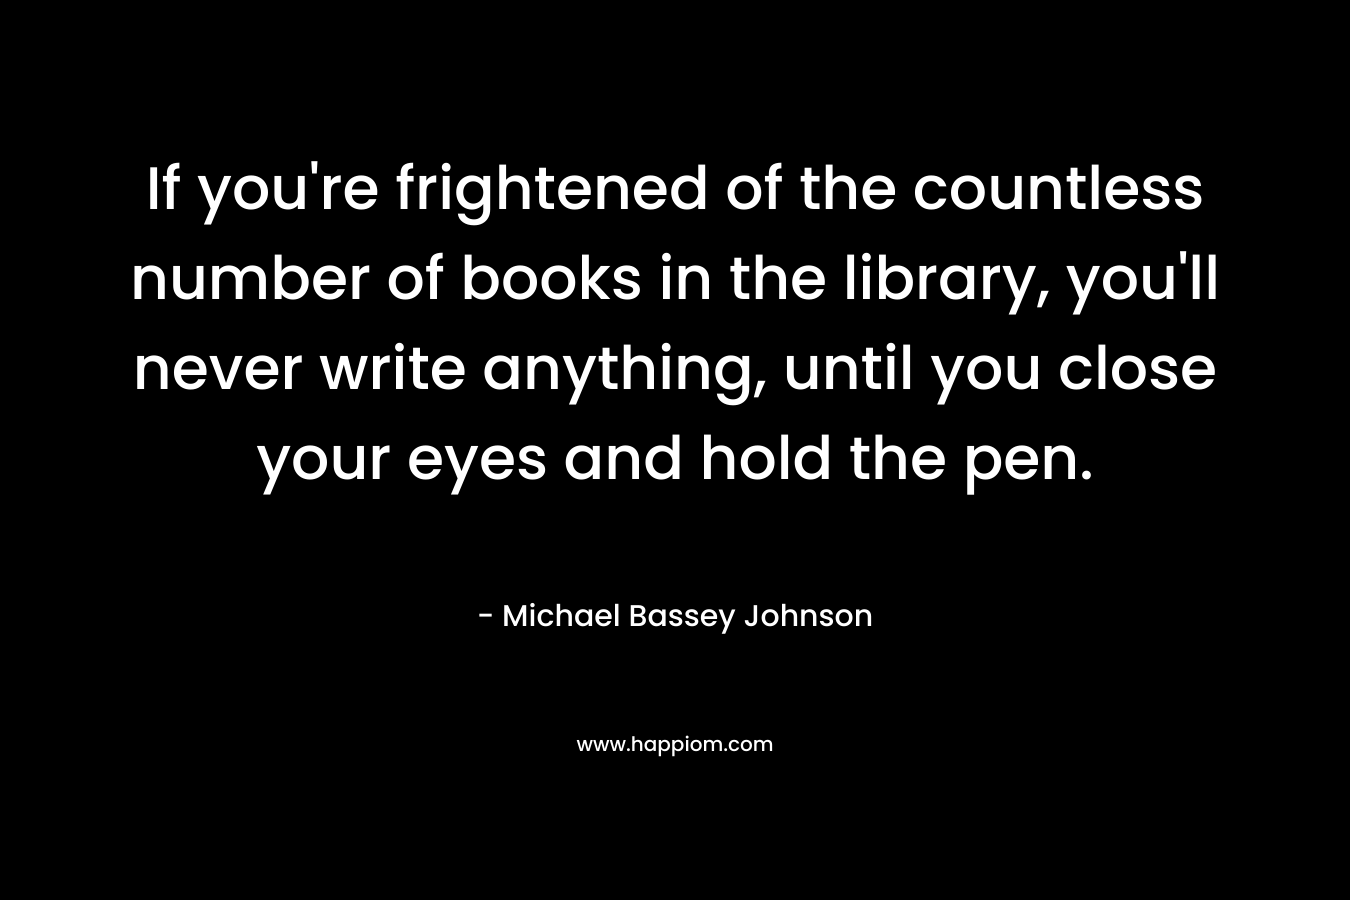 If you're frightened of the countless number of books in the library, you'll never write anything, until you close your eyes and hold the pen.